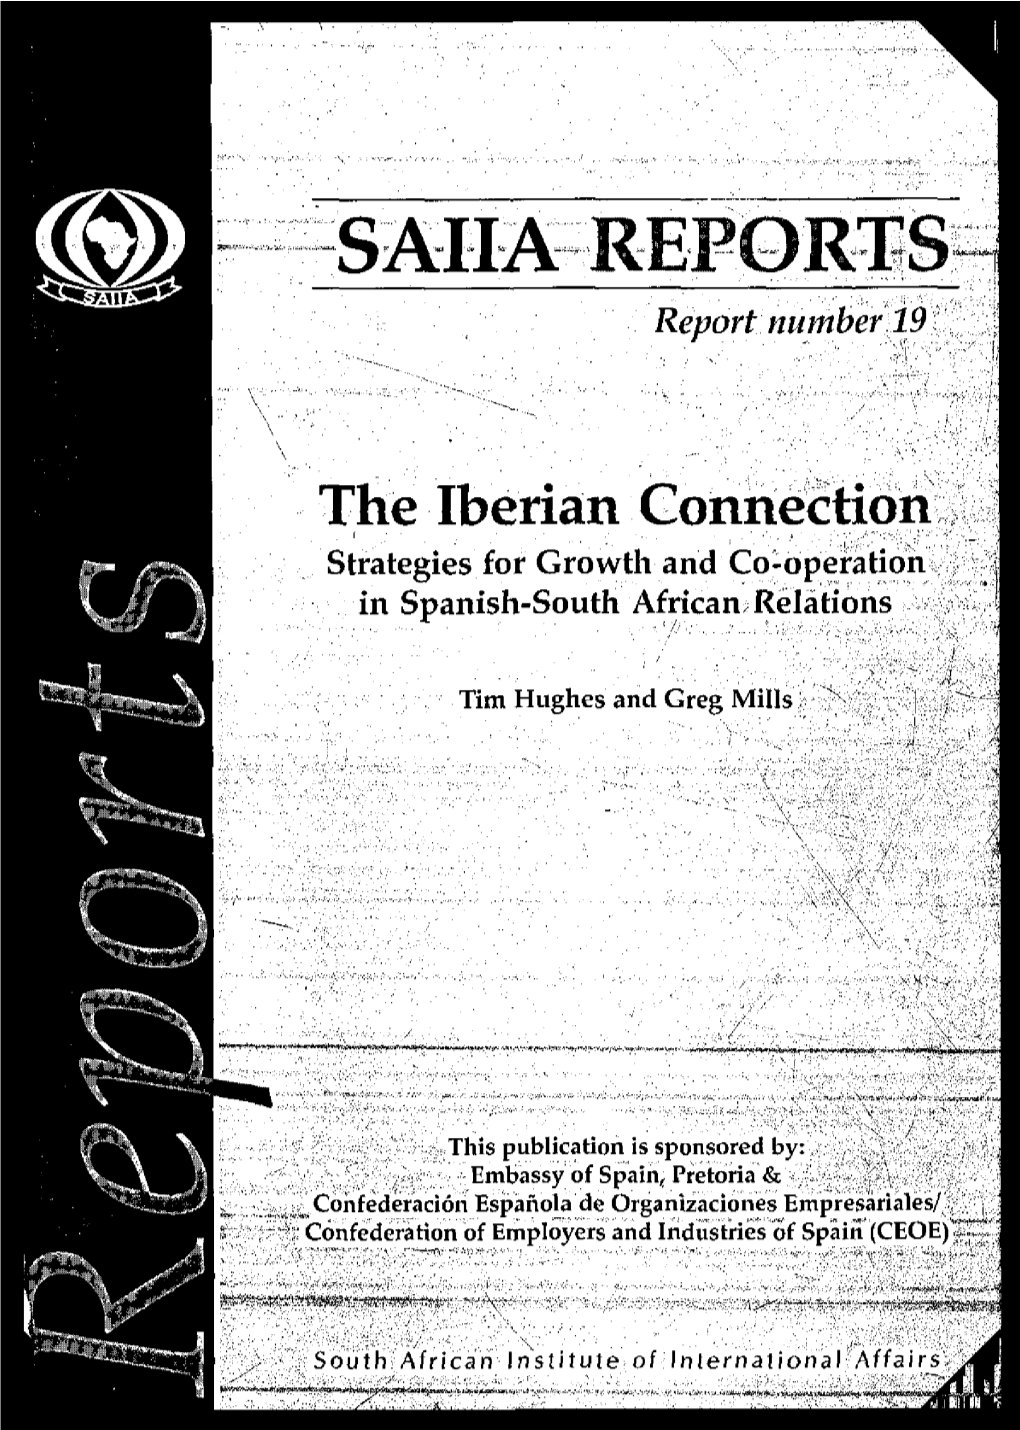 The Iberian Connection Strategies for Growth and Co-Operation in Spanish-South African, Relations